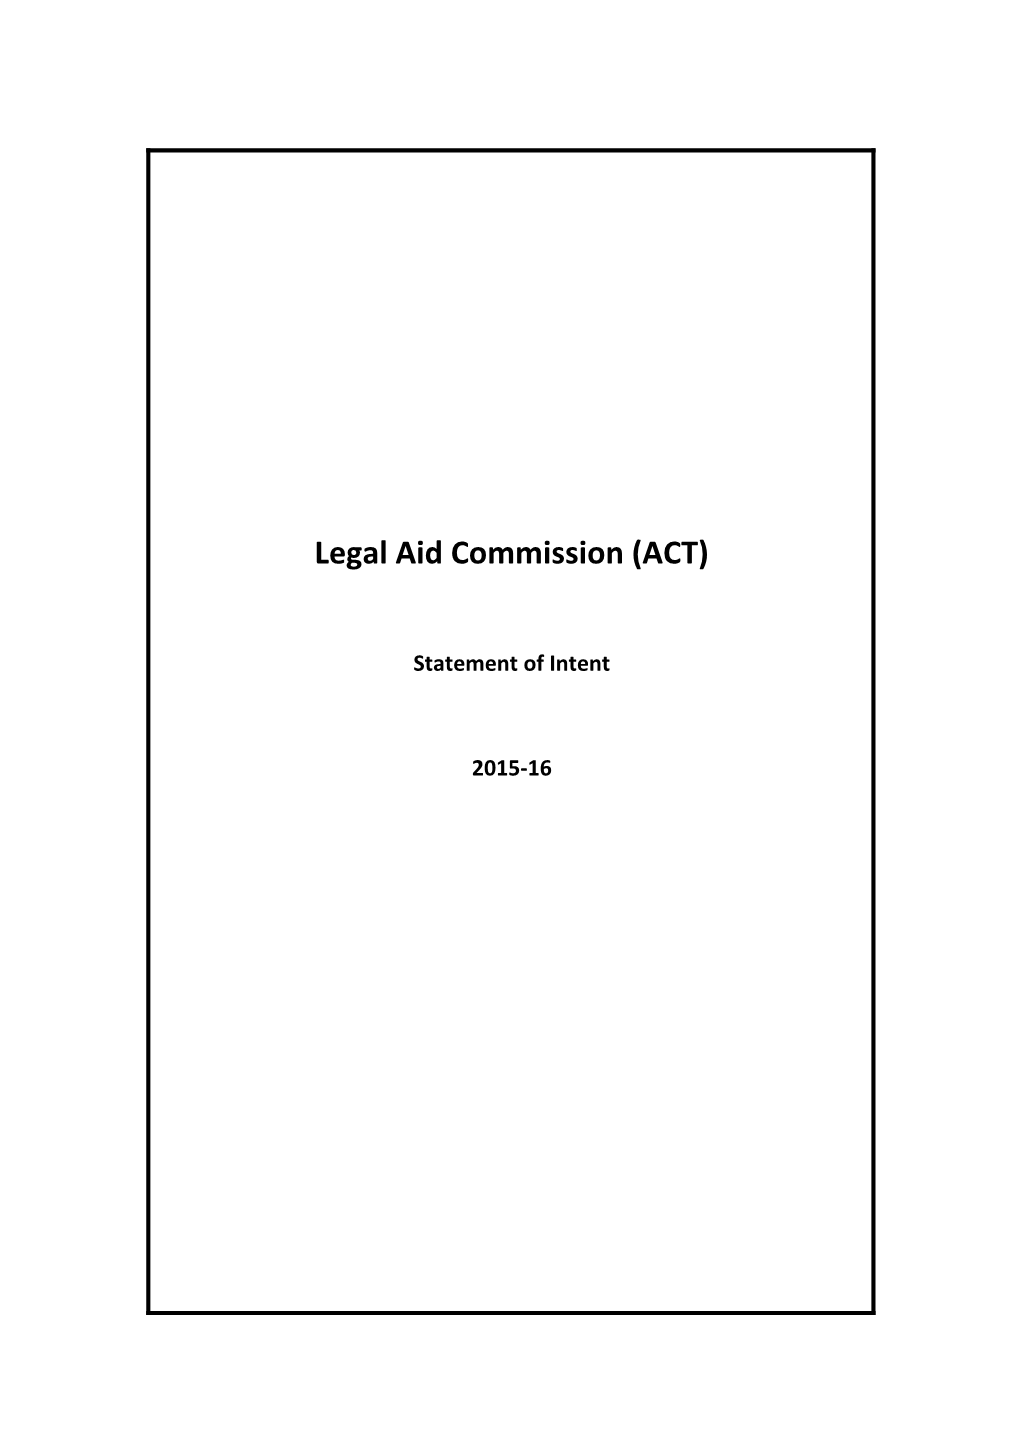 Legal Aid Commission (Act) Statement of Intent